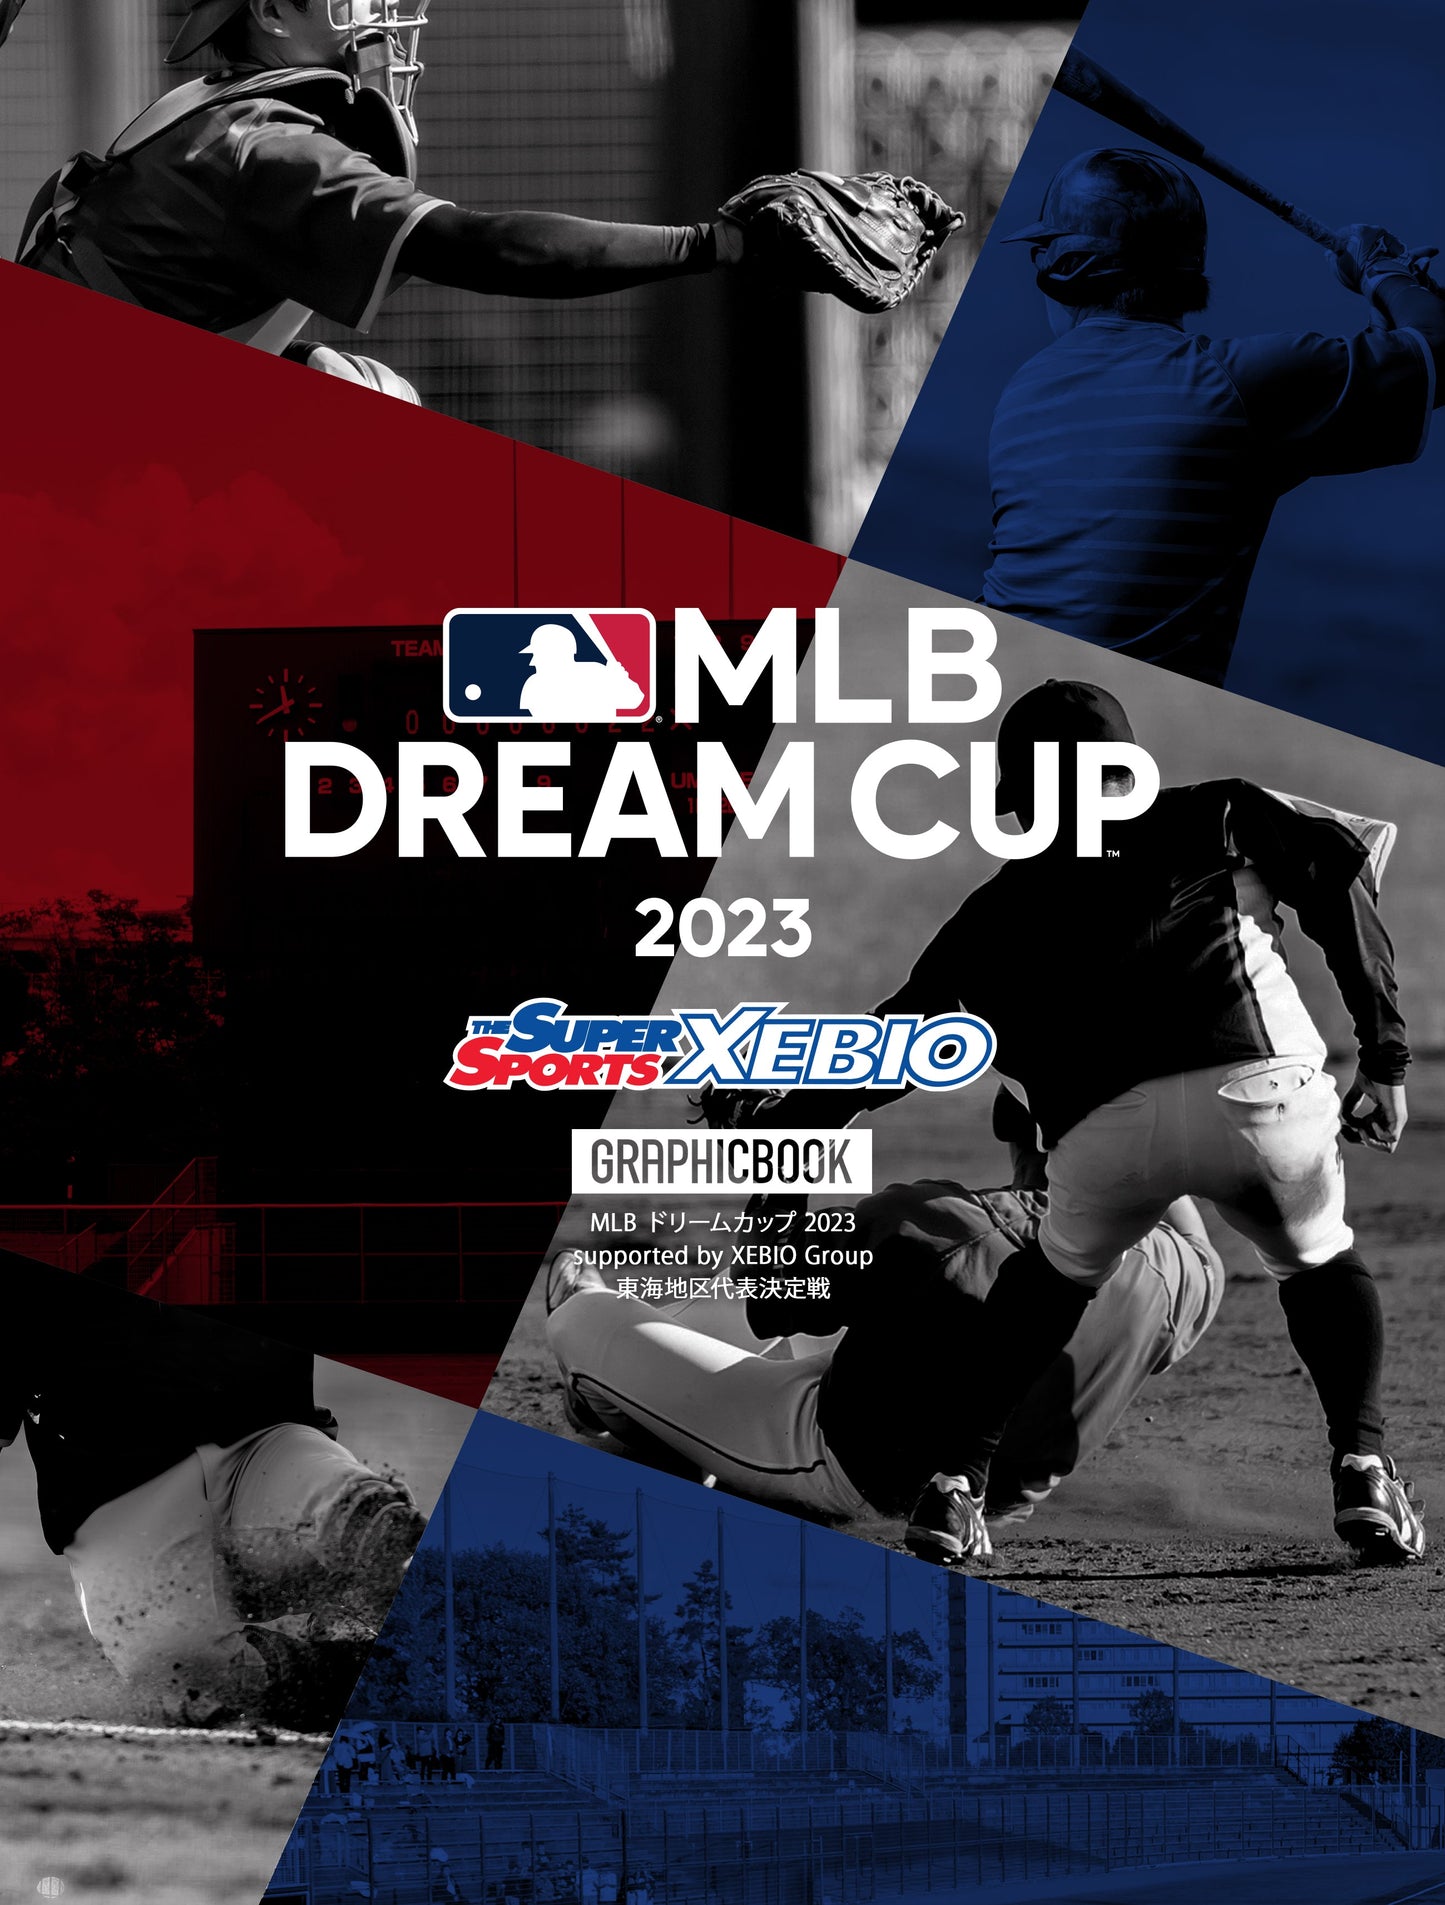 MLB ドリームカップ 2023 supported by XEBIO Group 東海地区代表決定戦（E1419819）